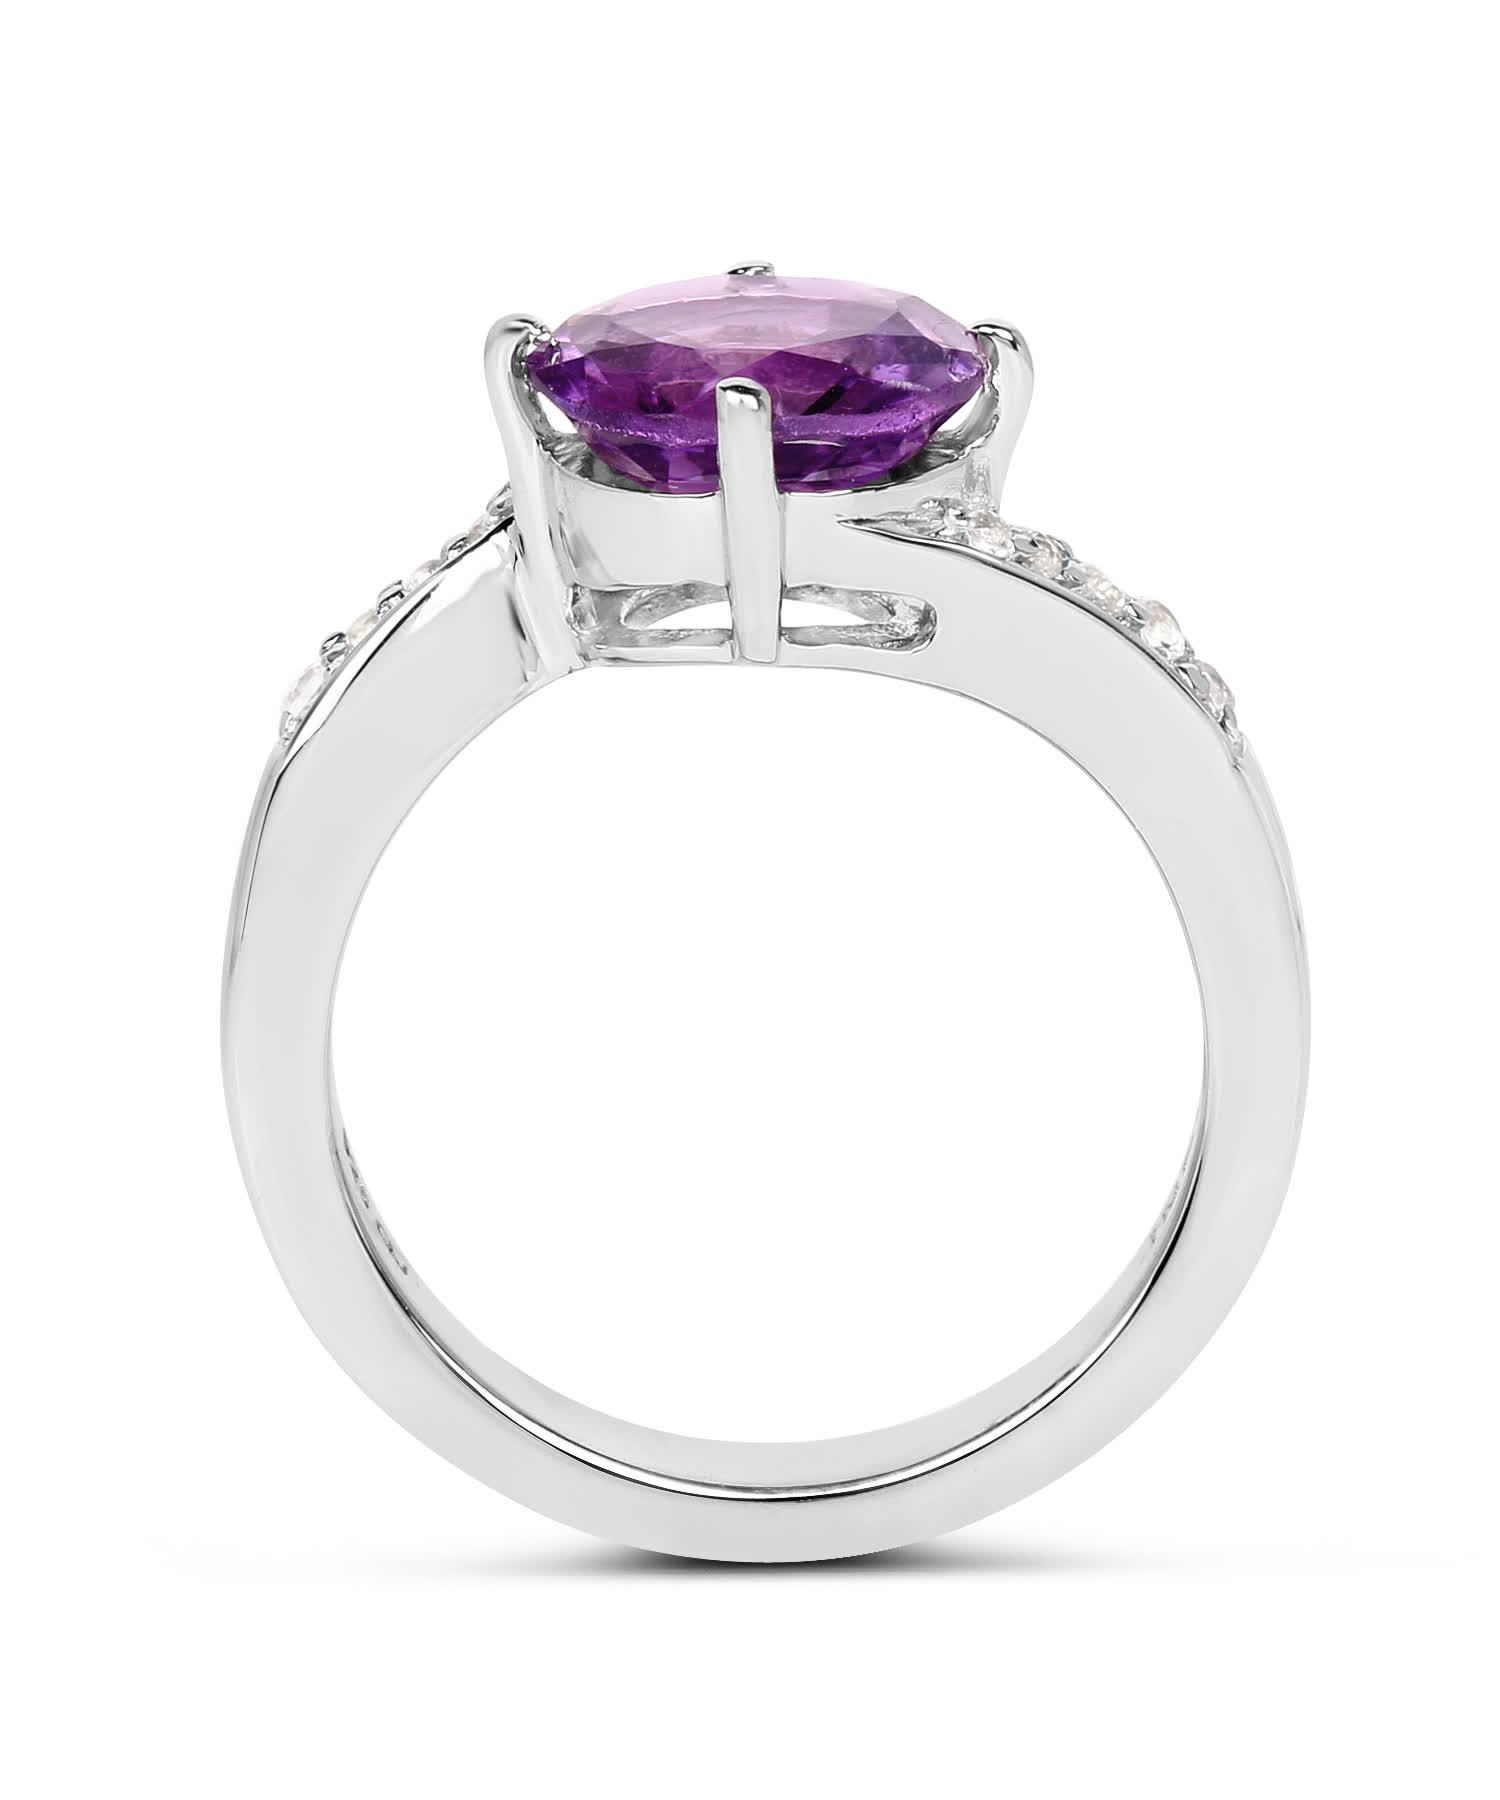 2.55ctw Natural Amethyst and Topaz Rhodium Plated 925 Sterling Silver Ring View 2